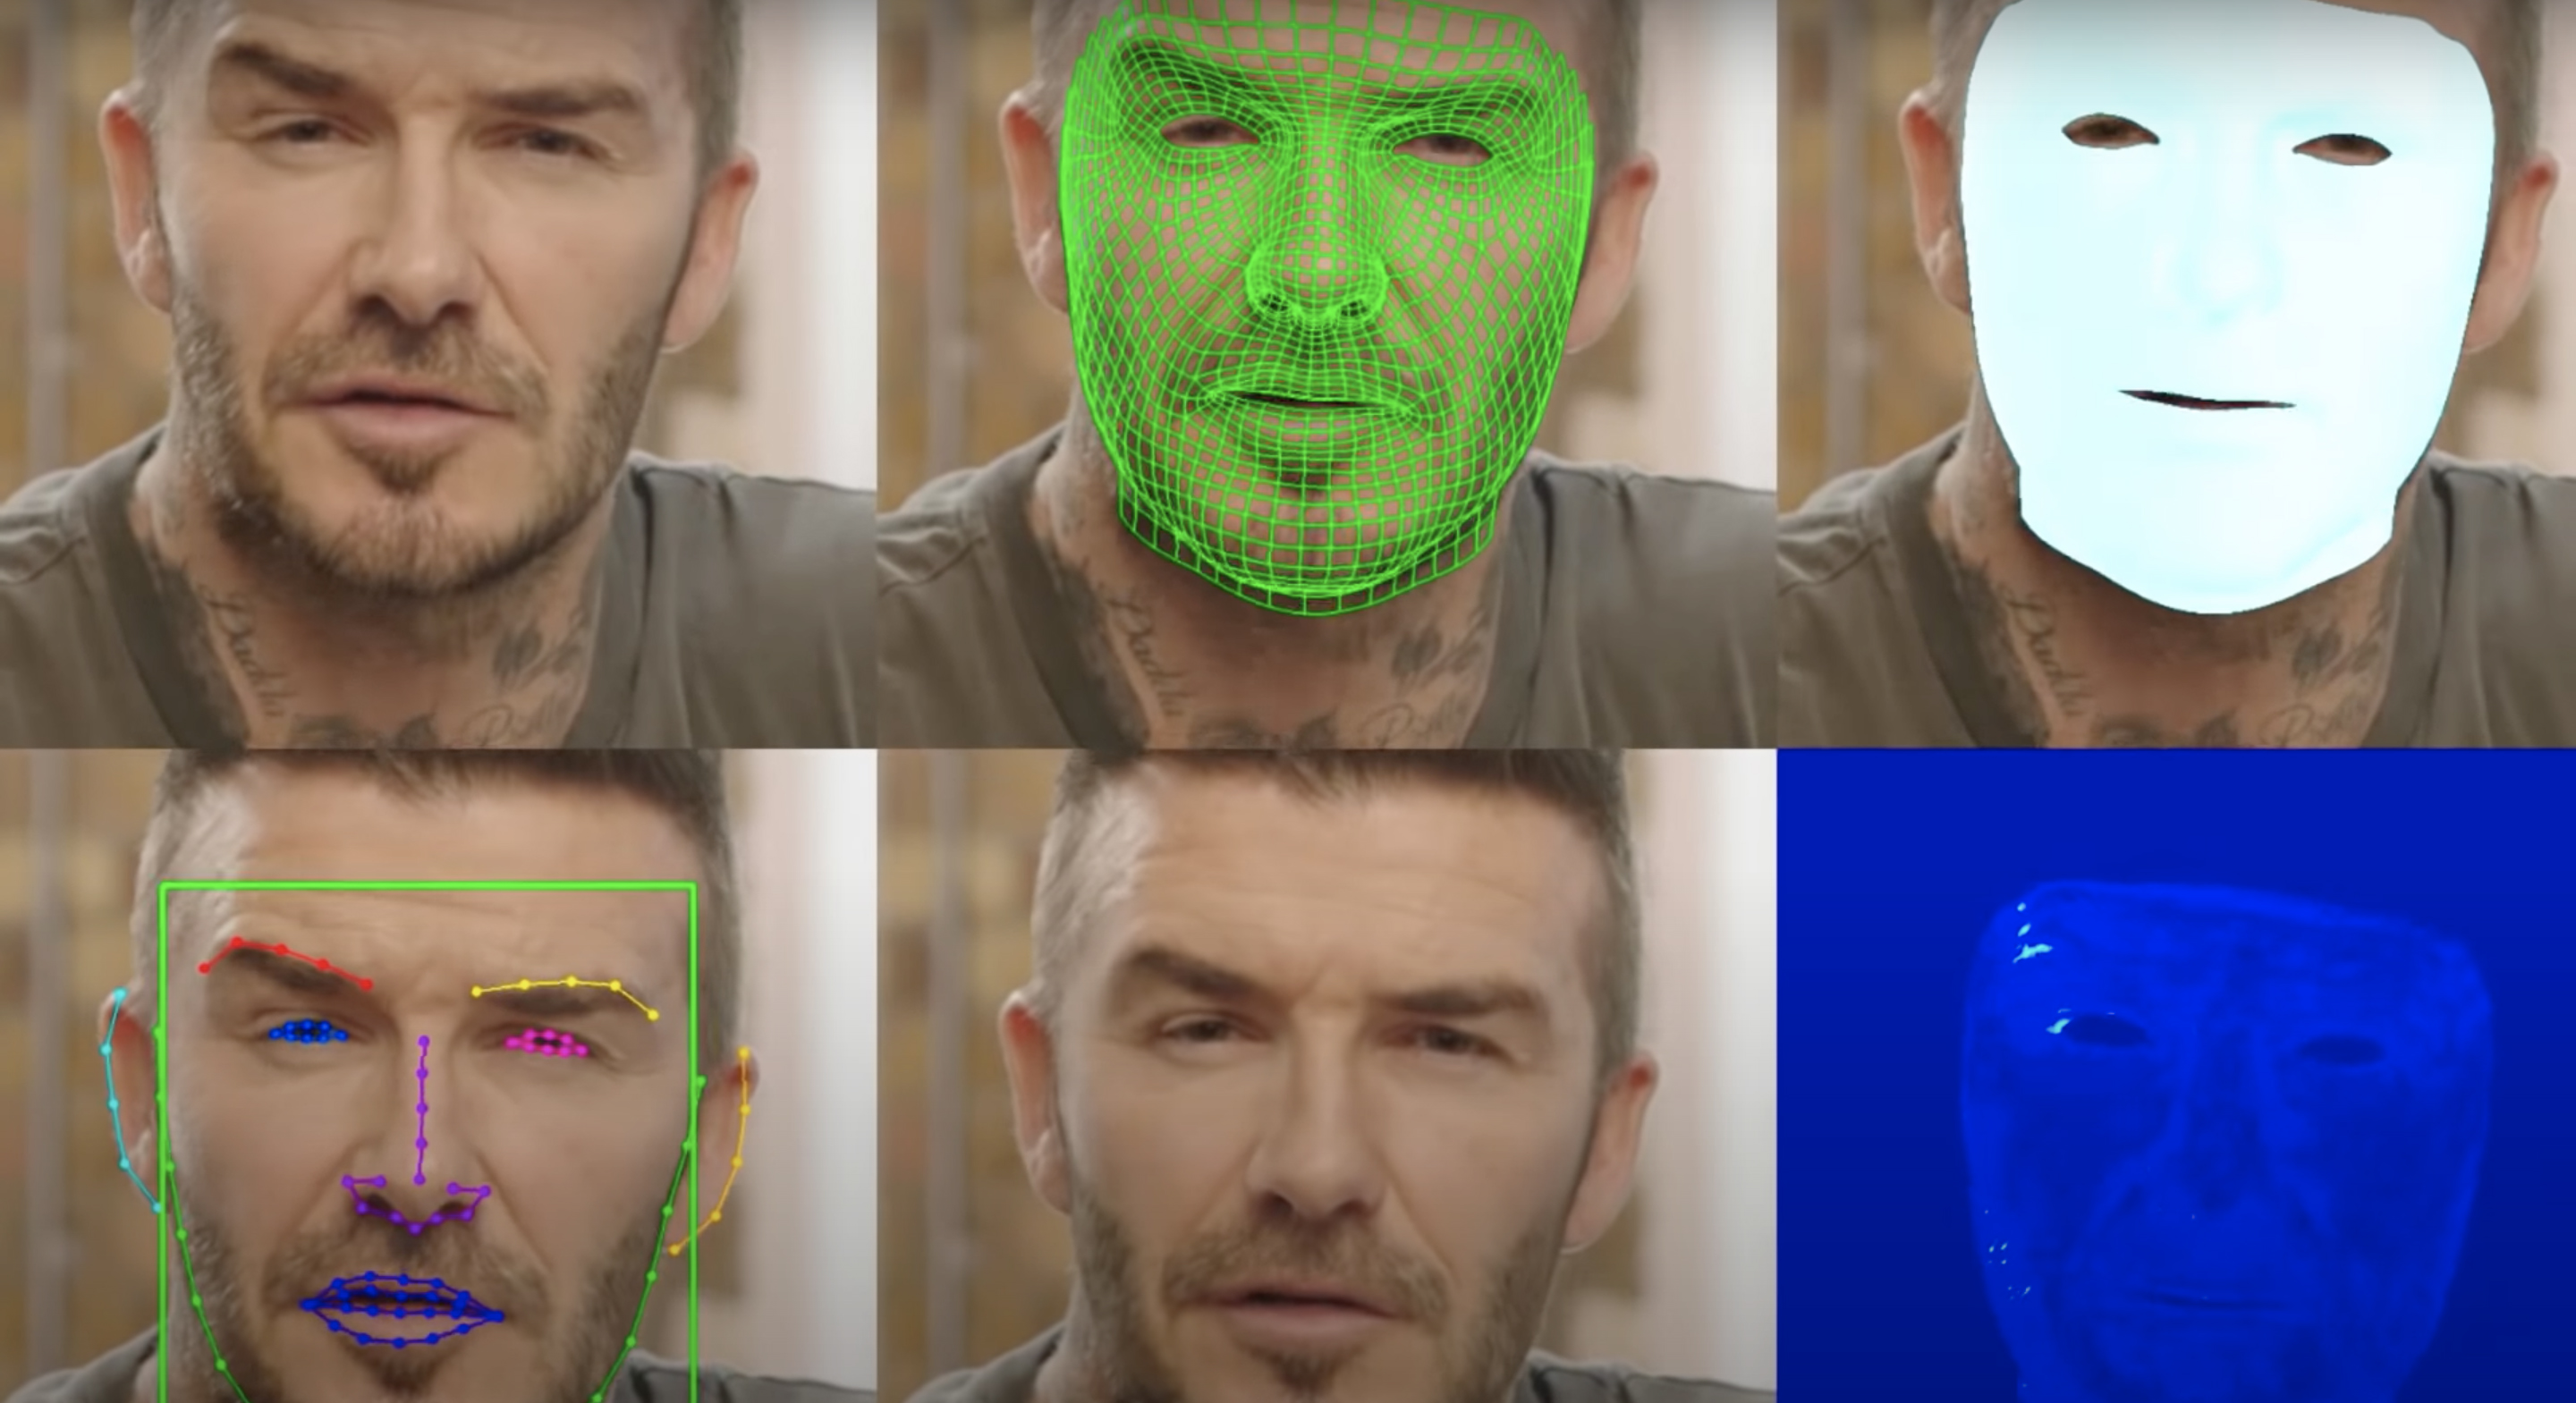 For this Zero Malaria Britain campaign featuring David Beckham, Synthesia worked to create versions of the soccer star speaking nine different languages.